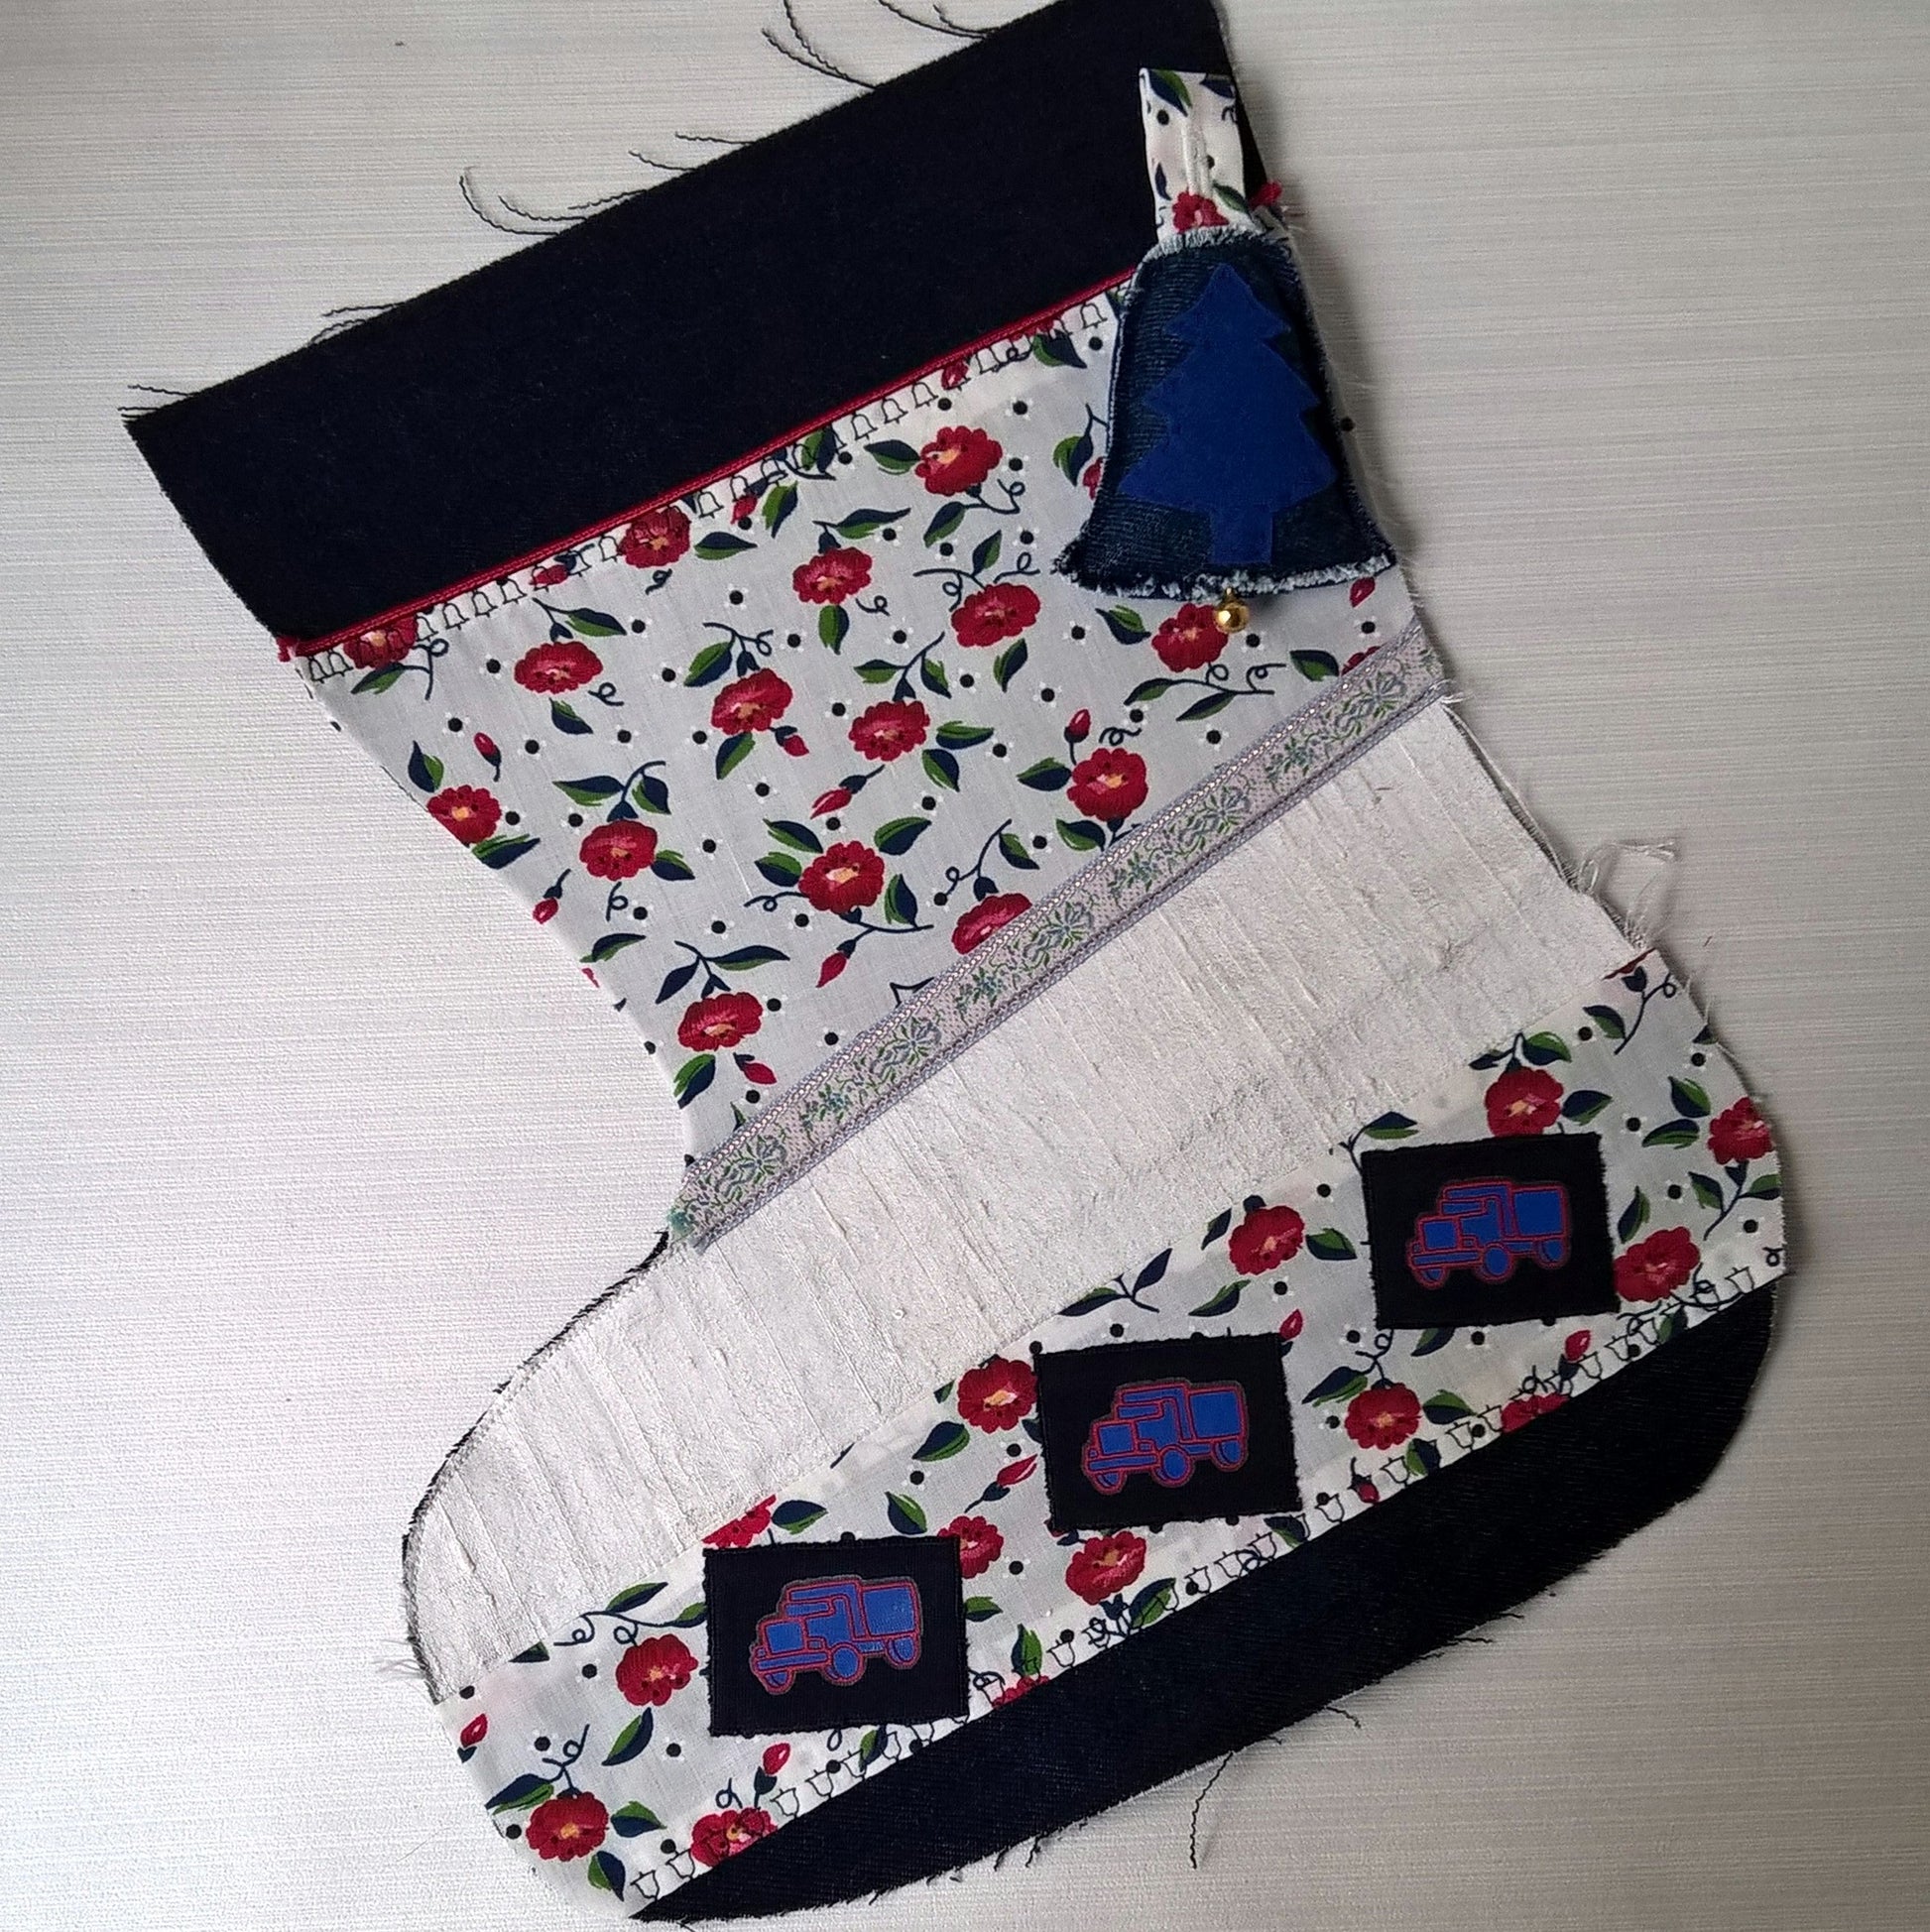 Indigo and poinsettia stocking ready for personalising with name embroidery